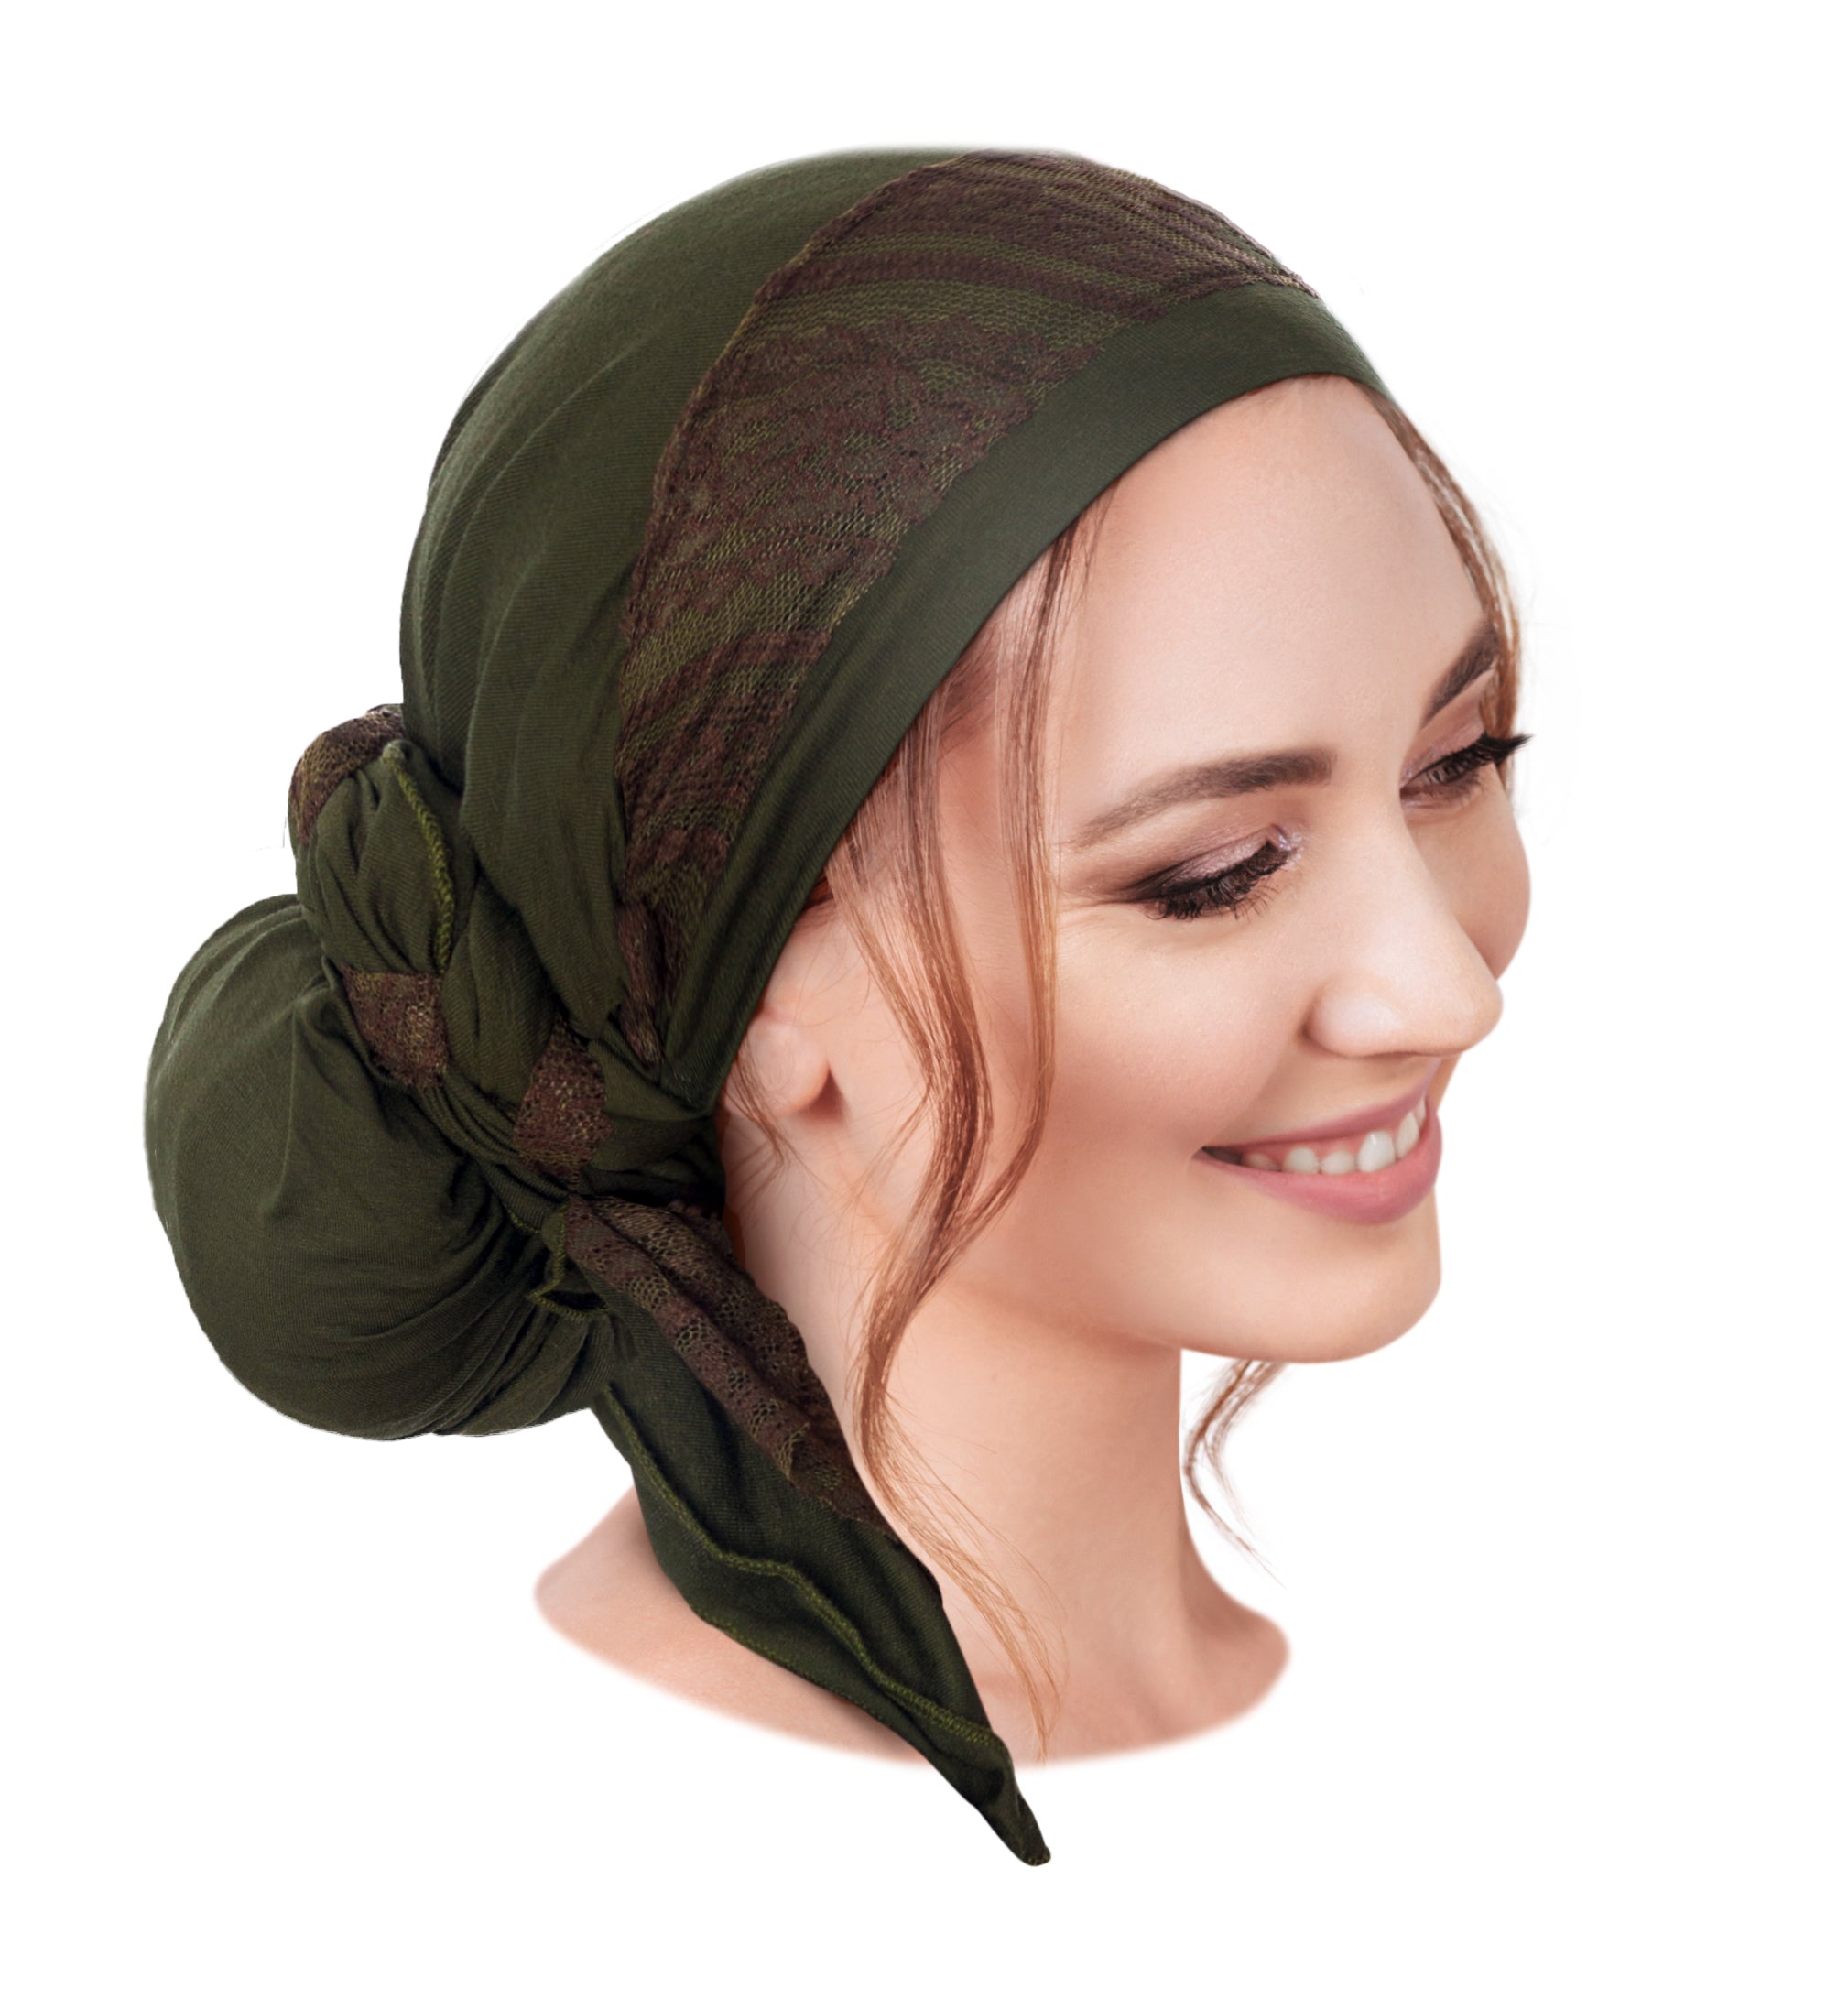 Olive green long headscarf lace wrap